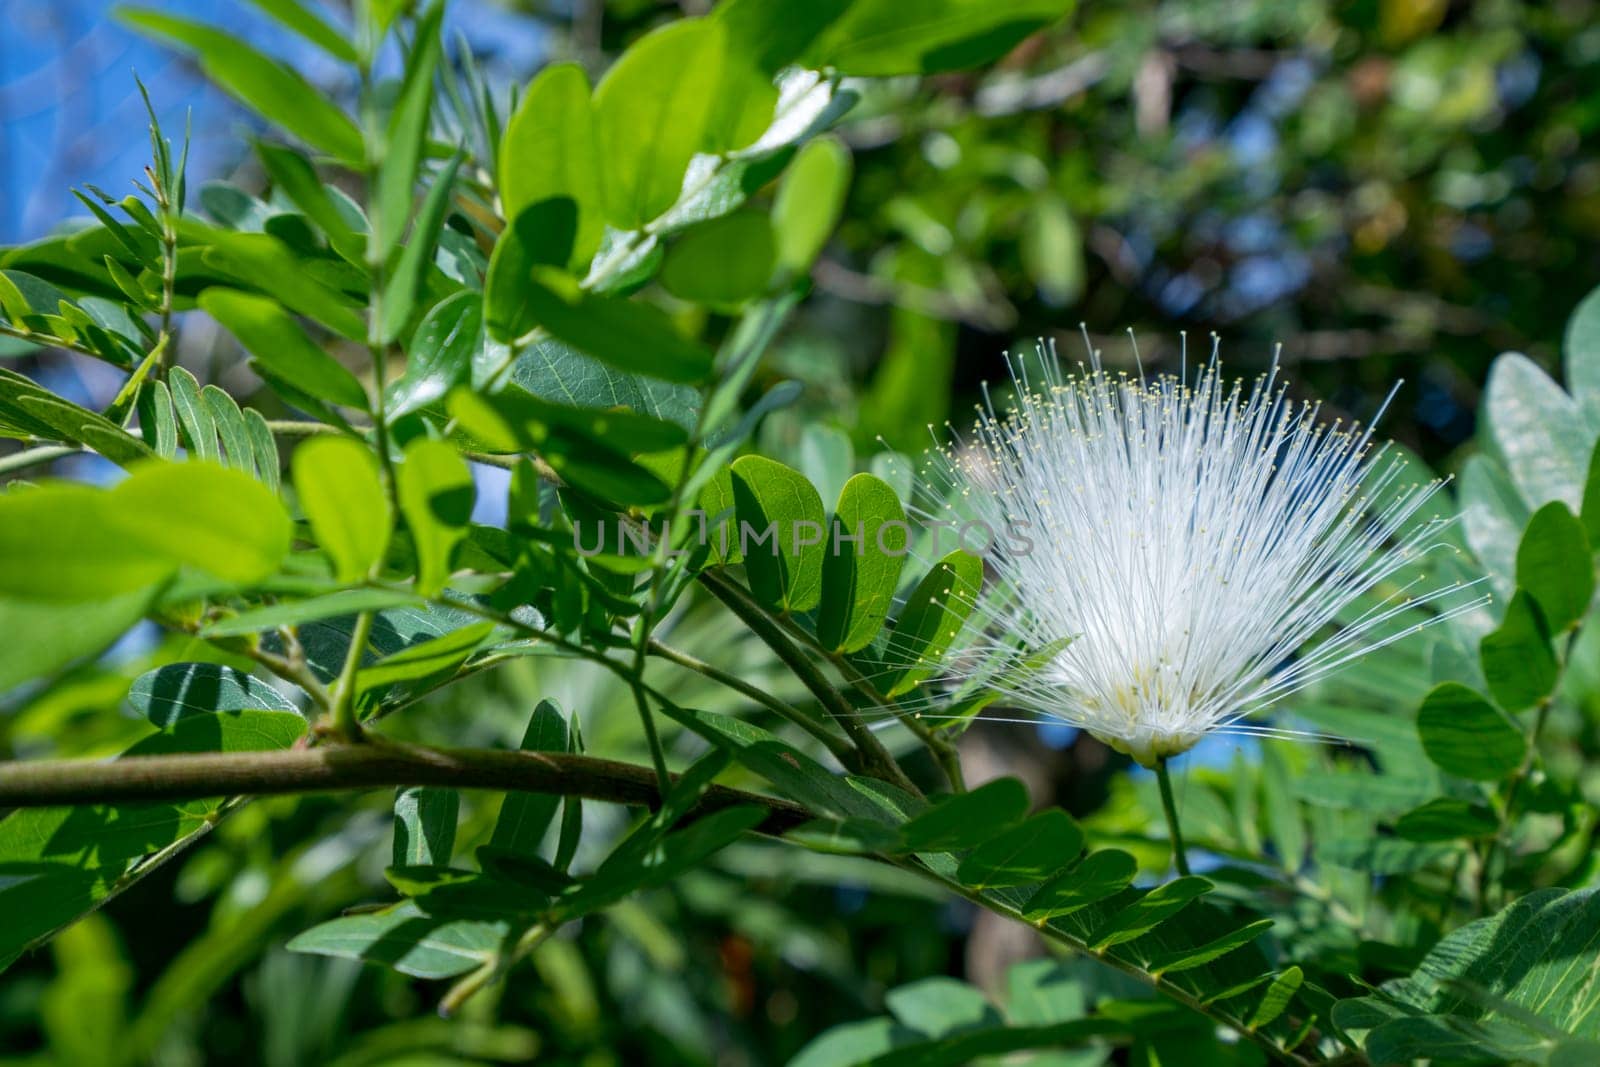 Image of sensitive plant called Mimosa Pudica by rivertime